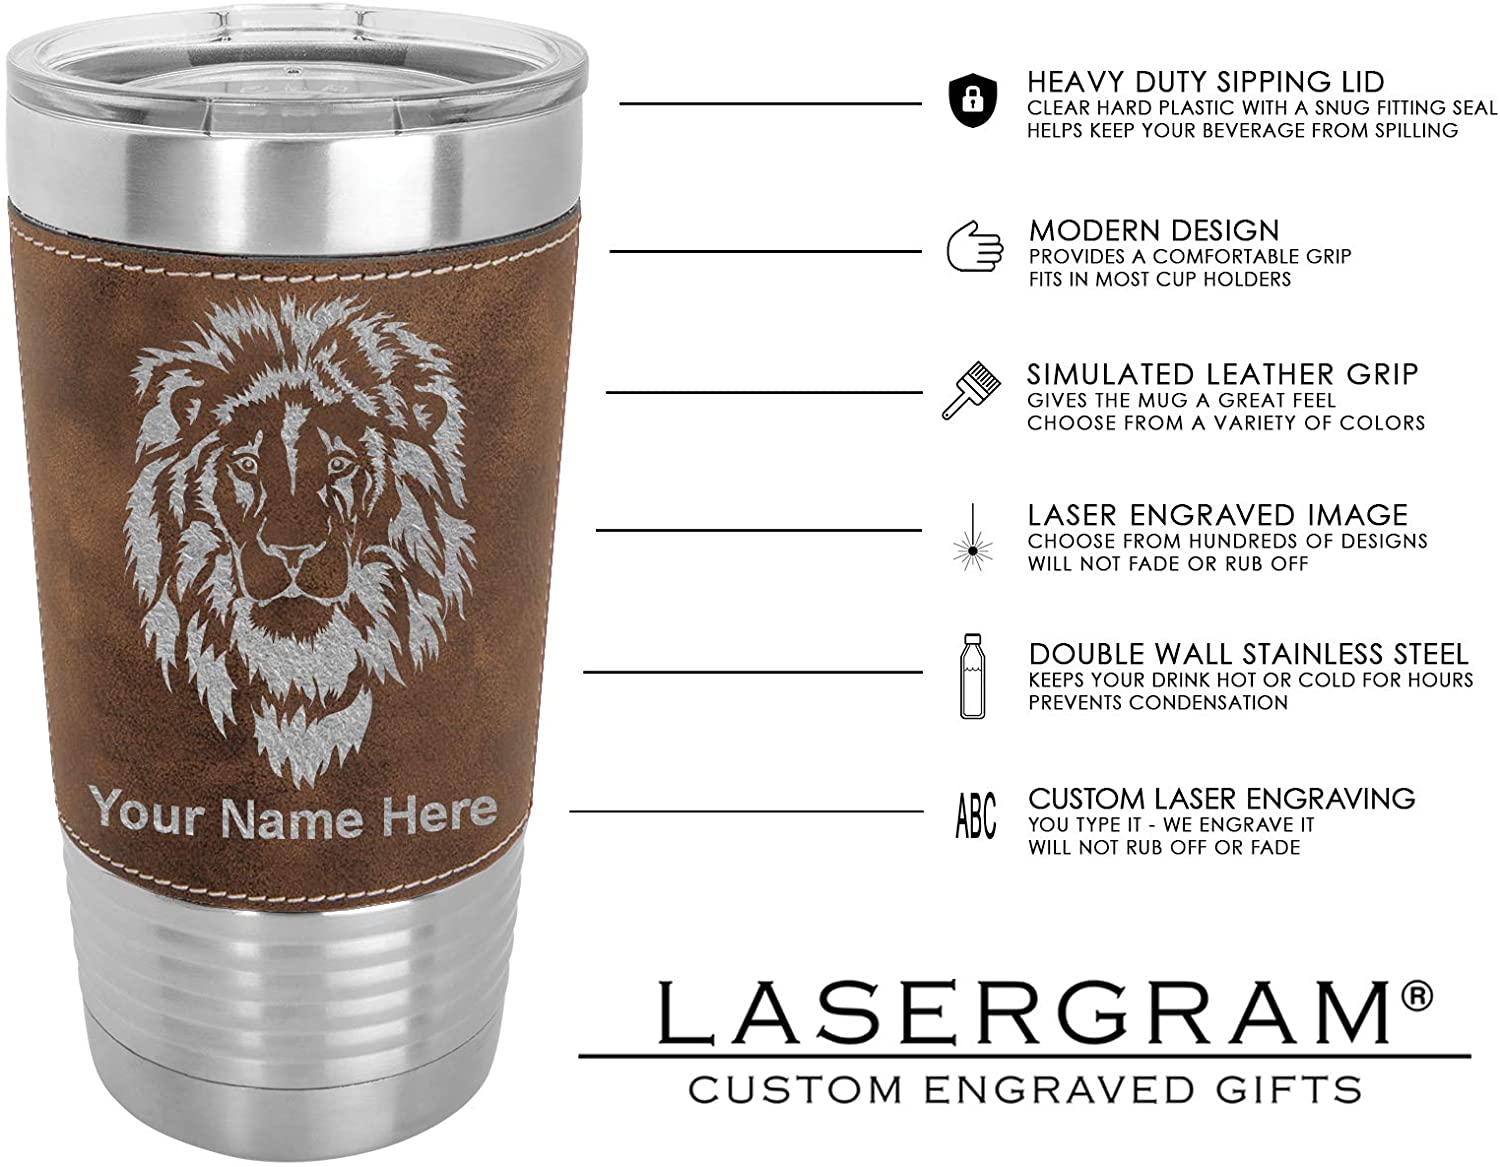 20oz Faux Leather Tumbler Mug, Helicopter 1, Personalized Engraving Included - LaserGram Custom Engraved Gifts